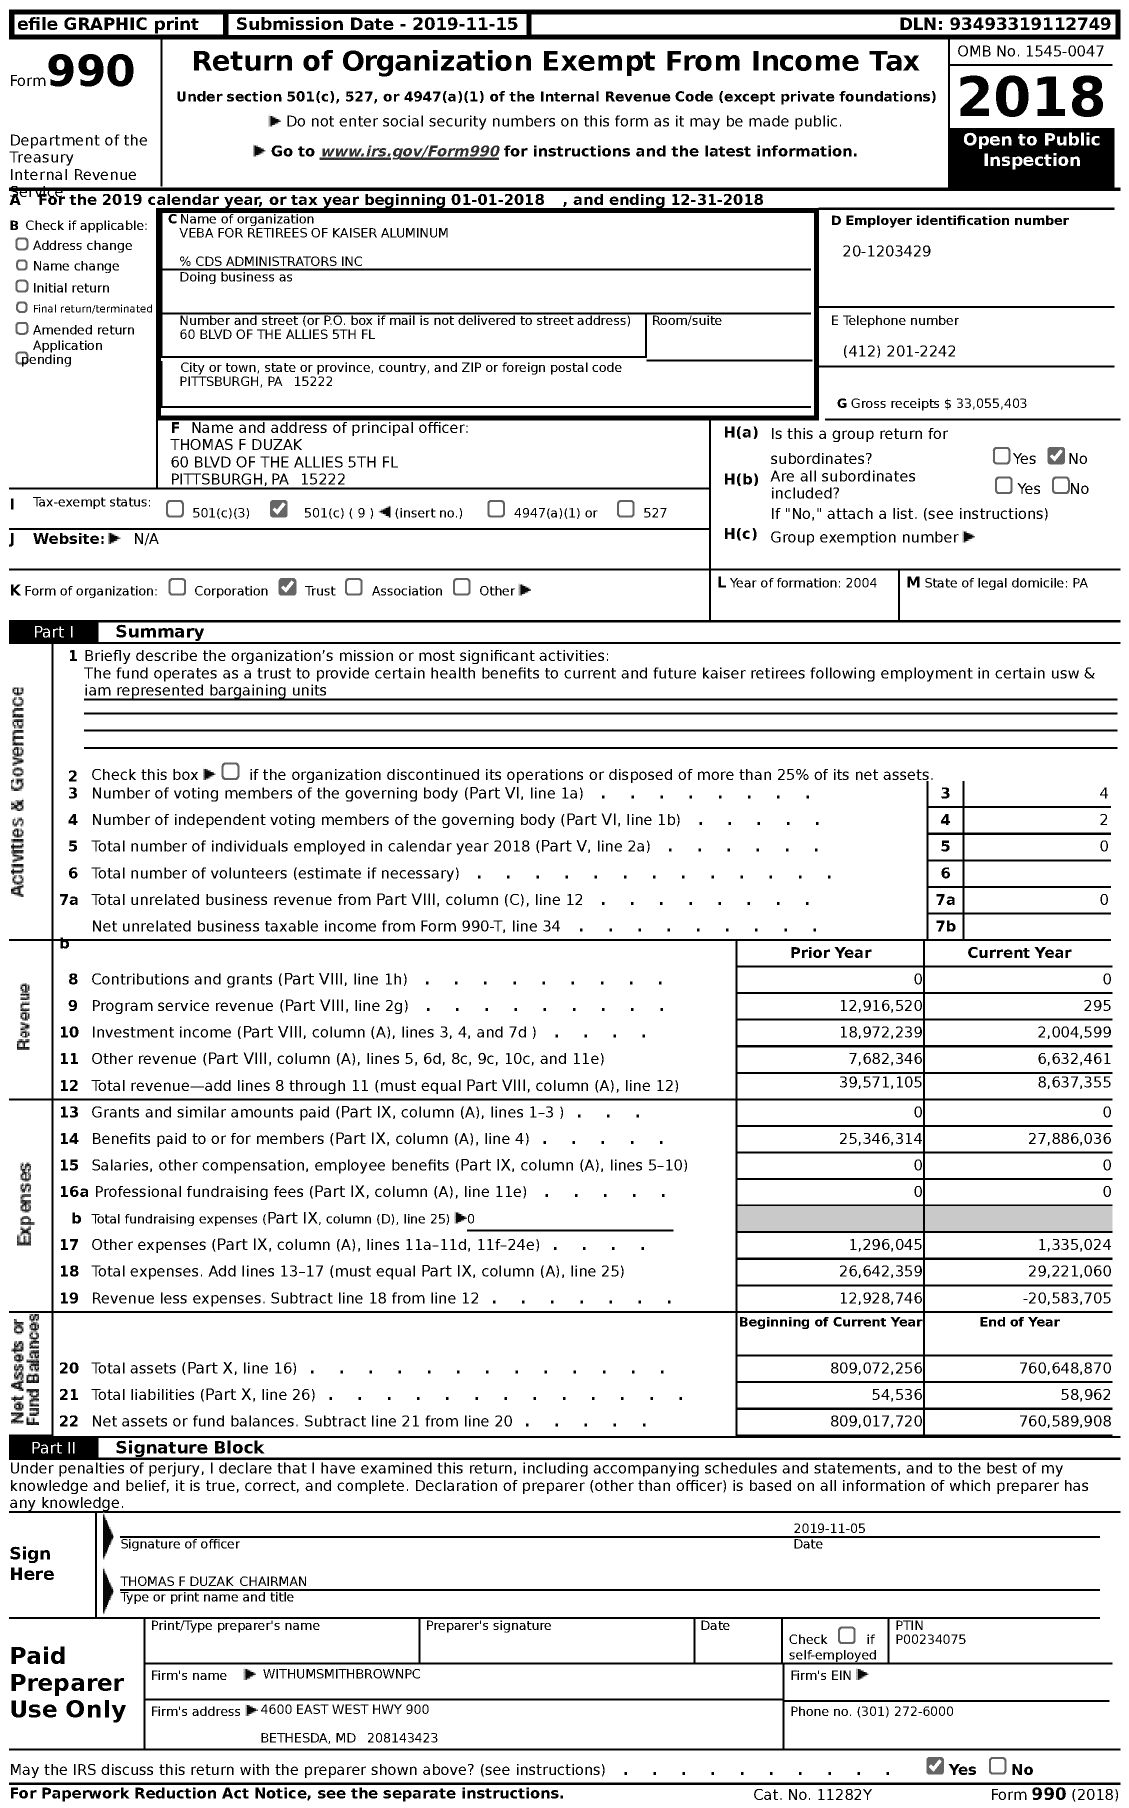 Image of first page of 2018 Form 990 for Veba for Retirees of Kaiser Aluminum